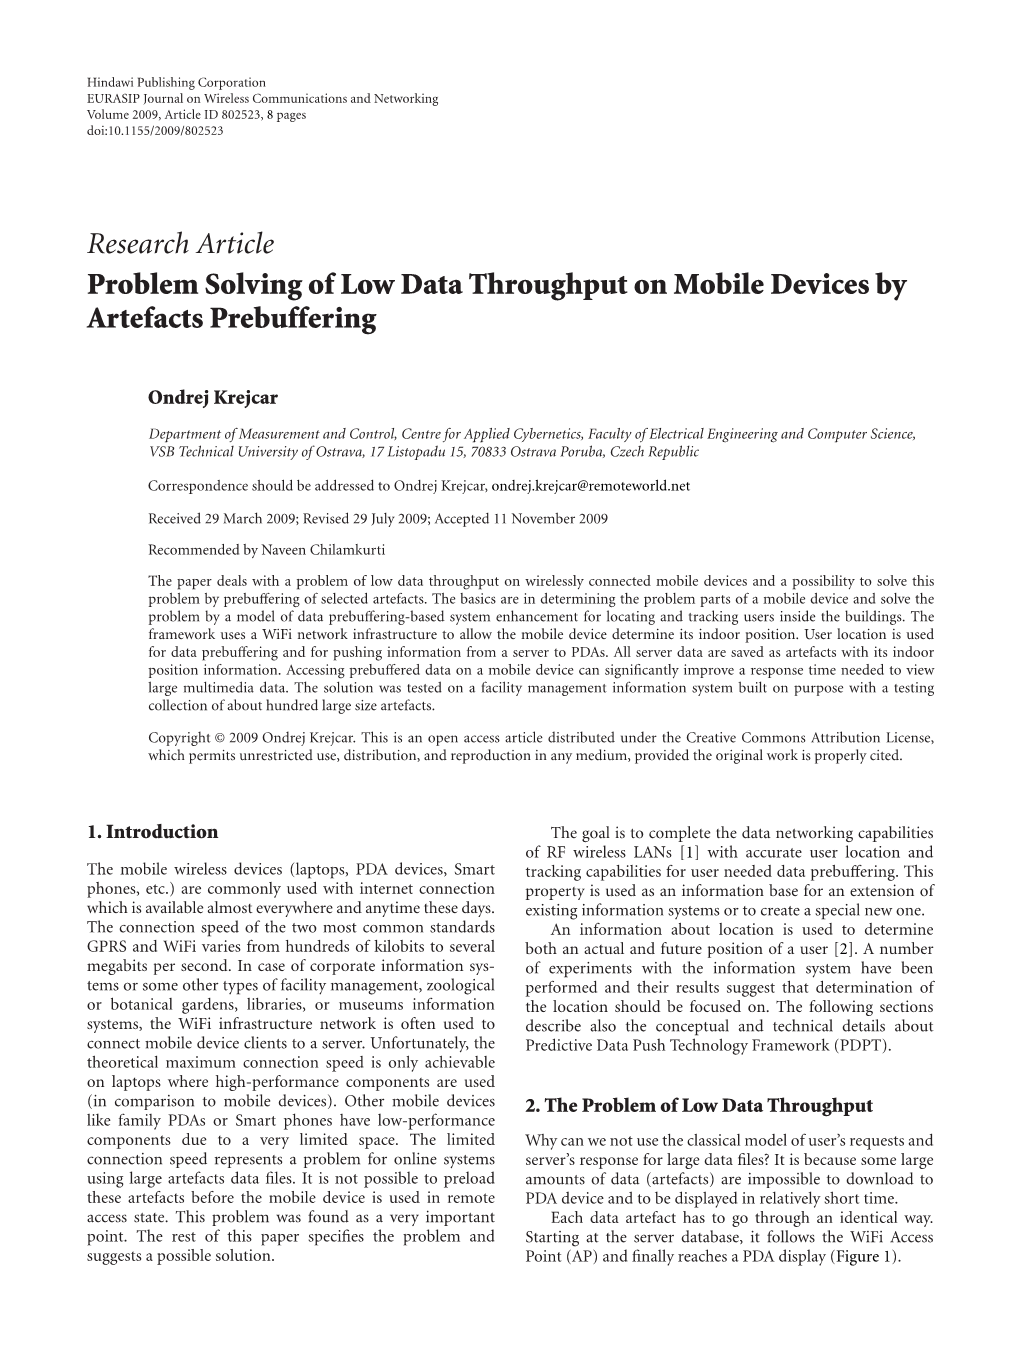 Research Article Problem Solving of Low Data Throughput on Mobile Devices by Artefacts Prebuffering